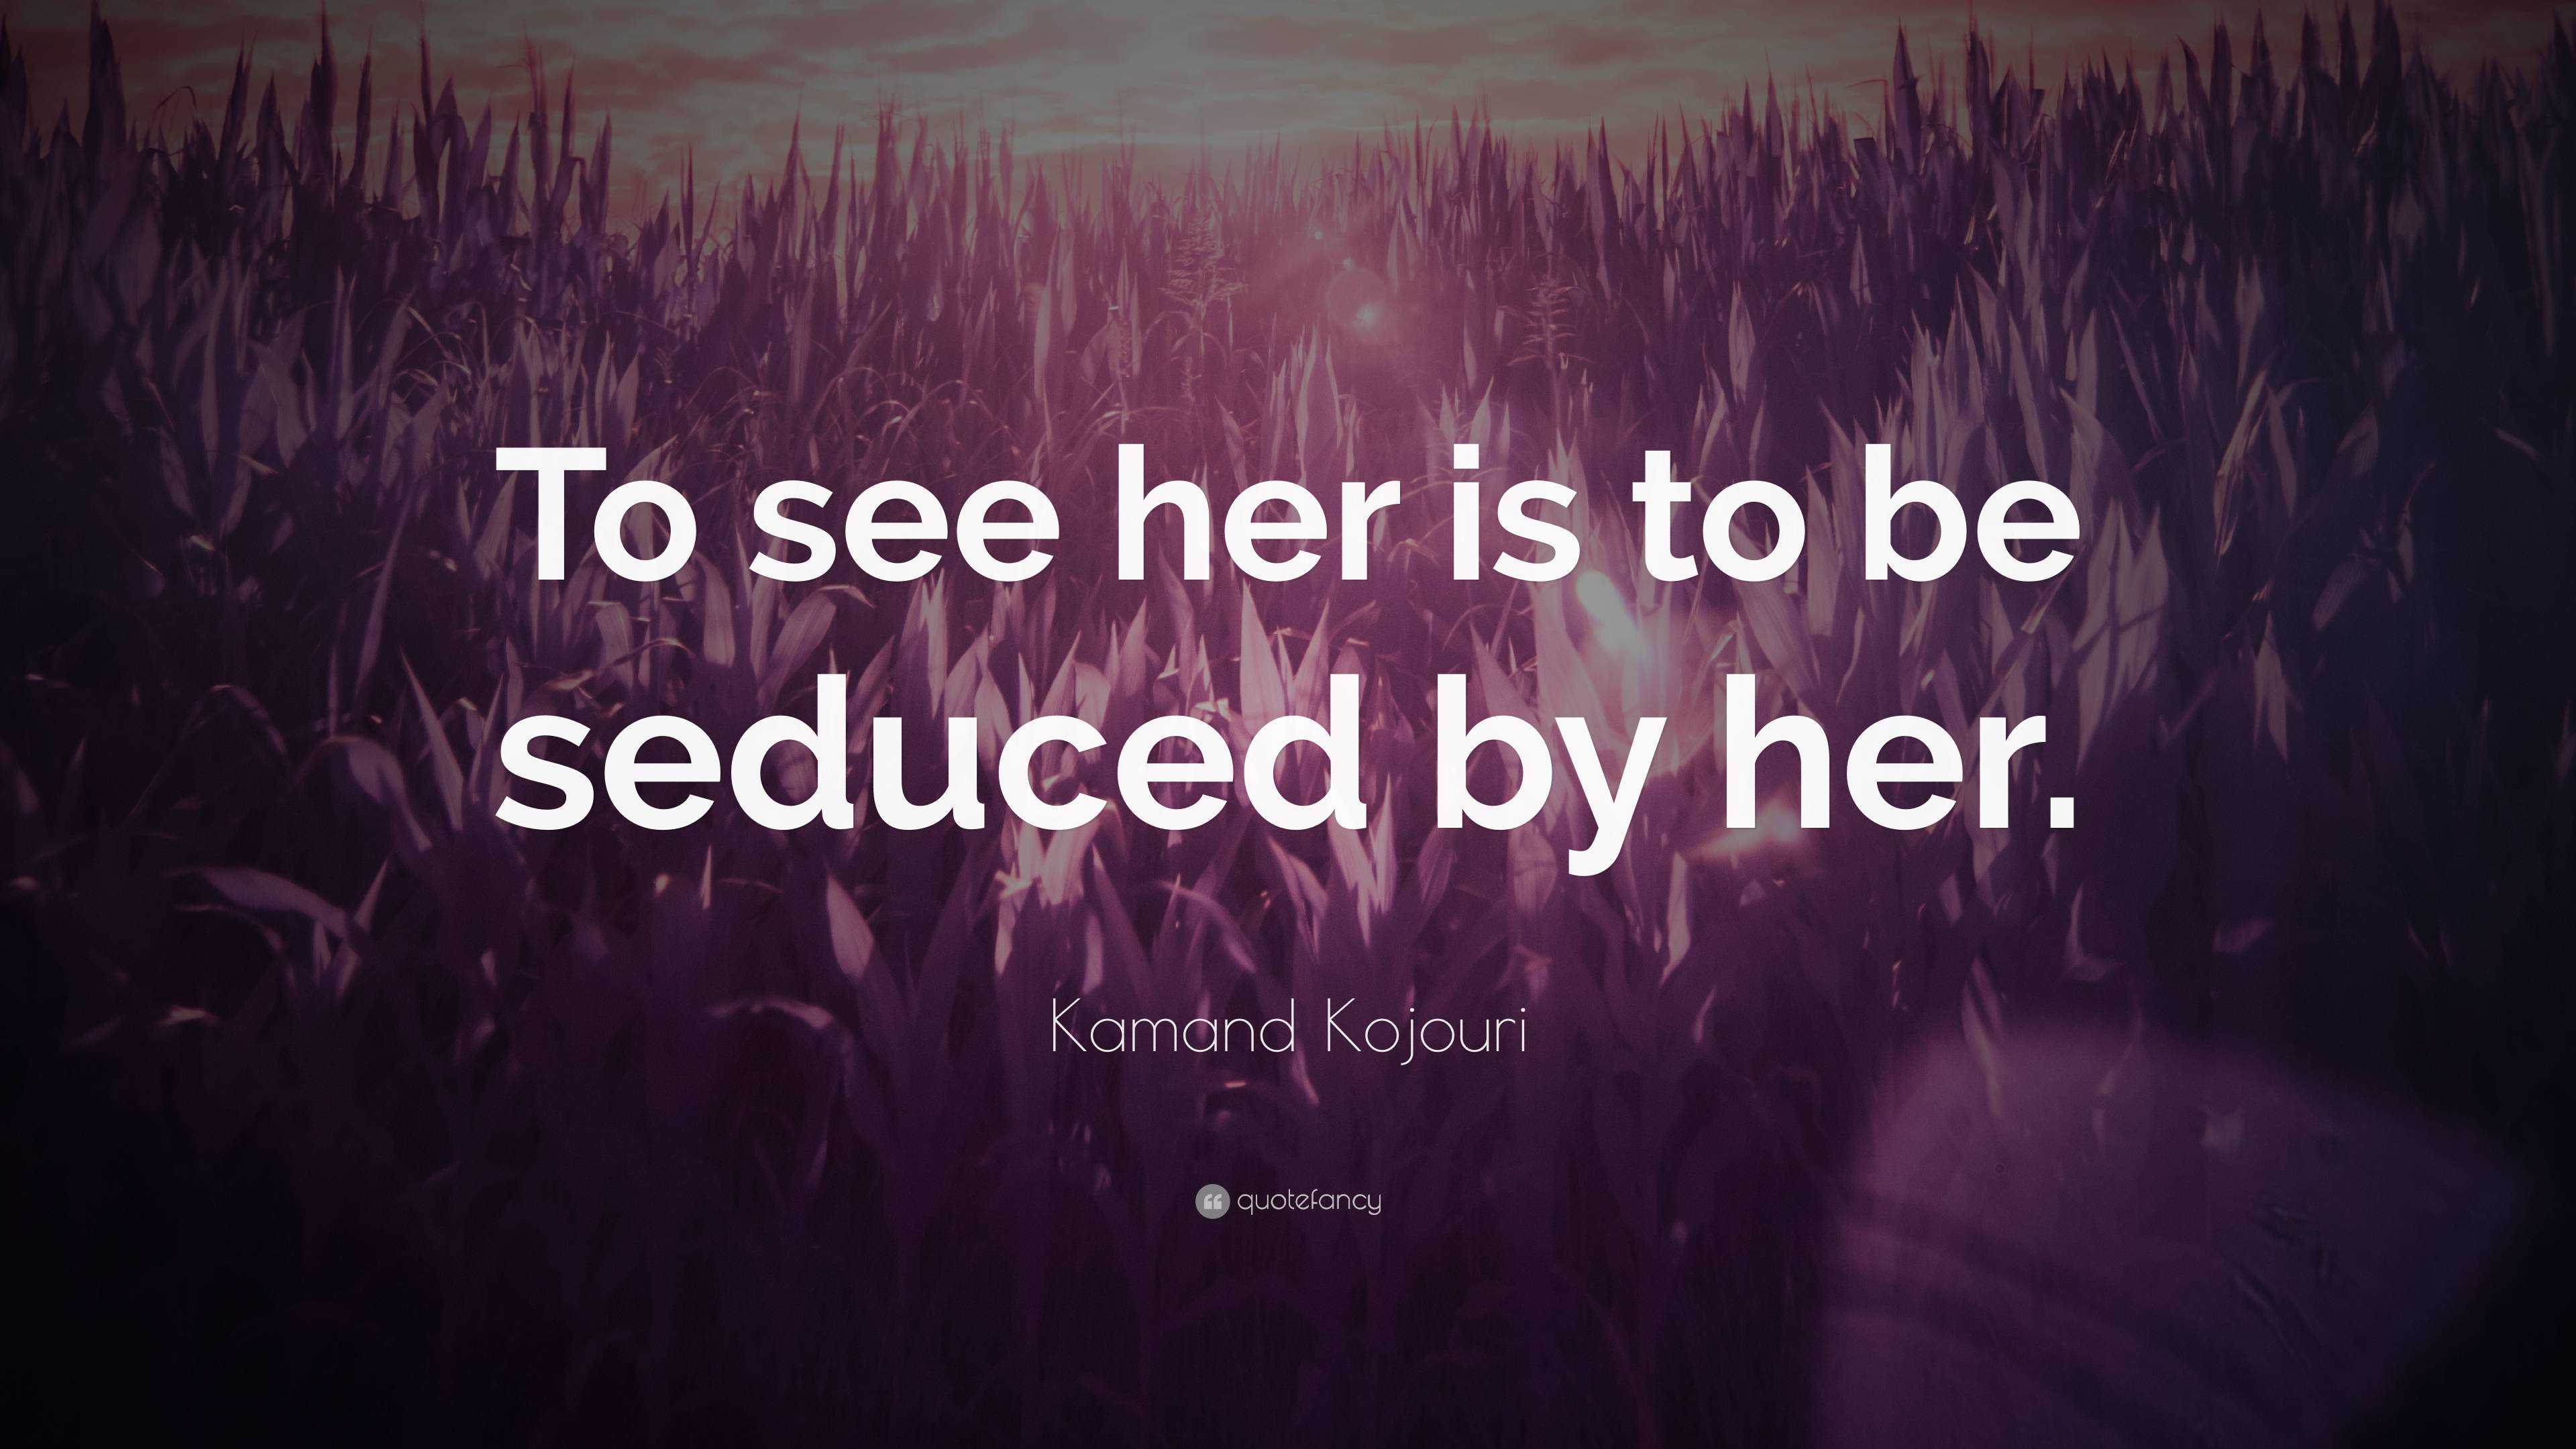 Kamand Kojouri Quote: “To see her is to be seduced by her.”